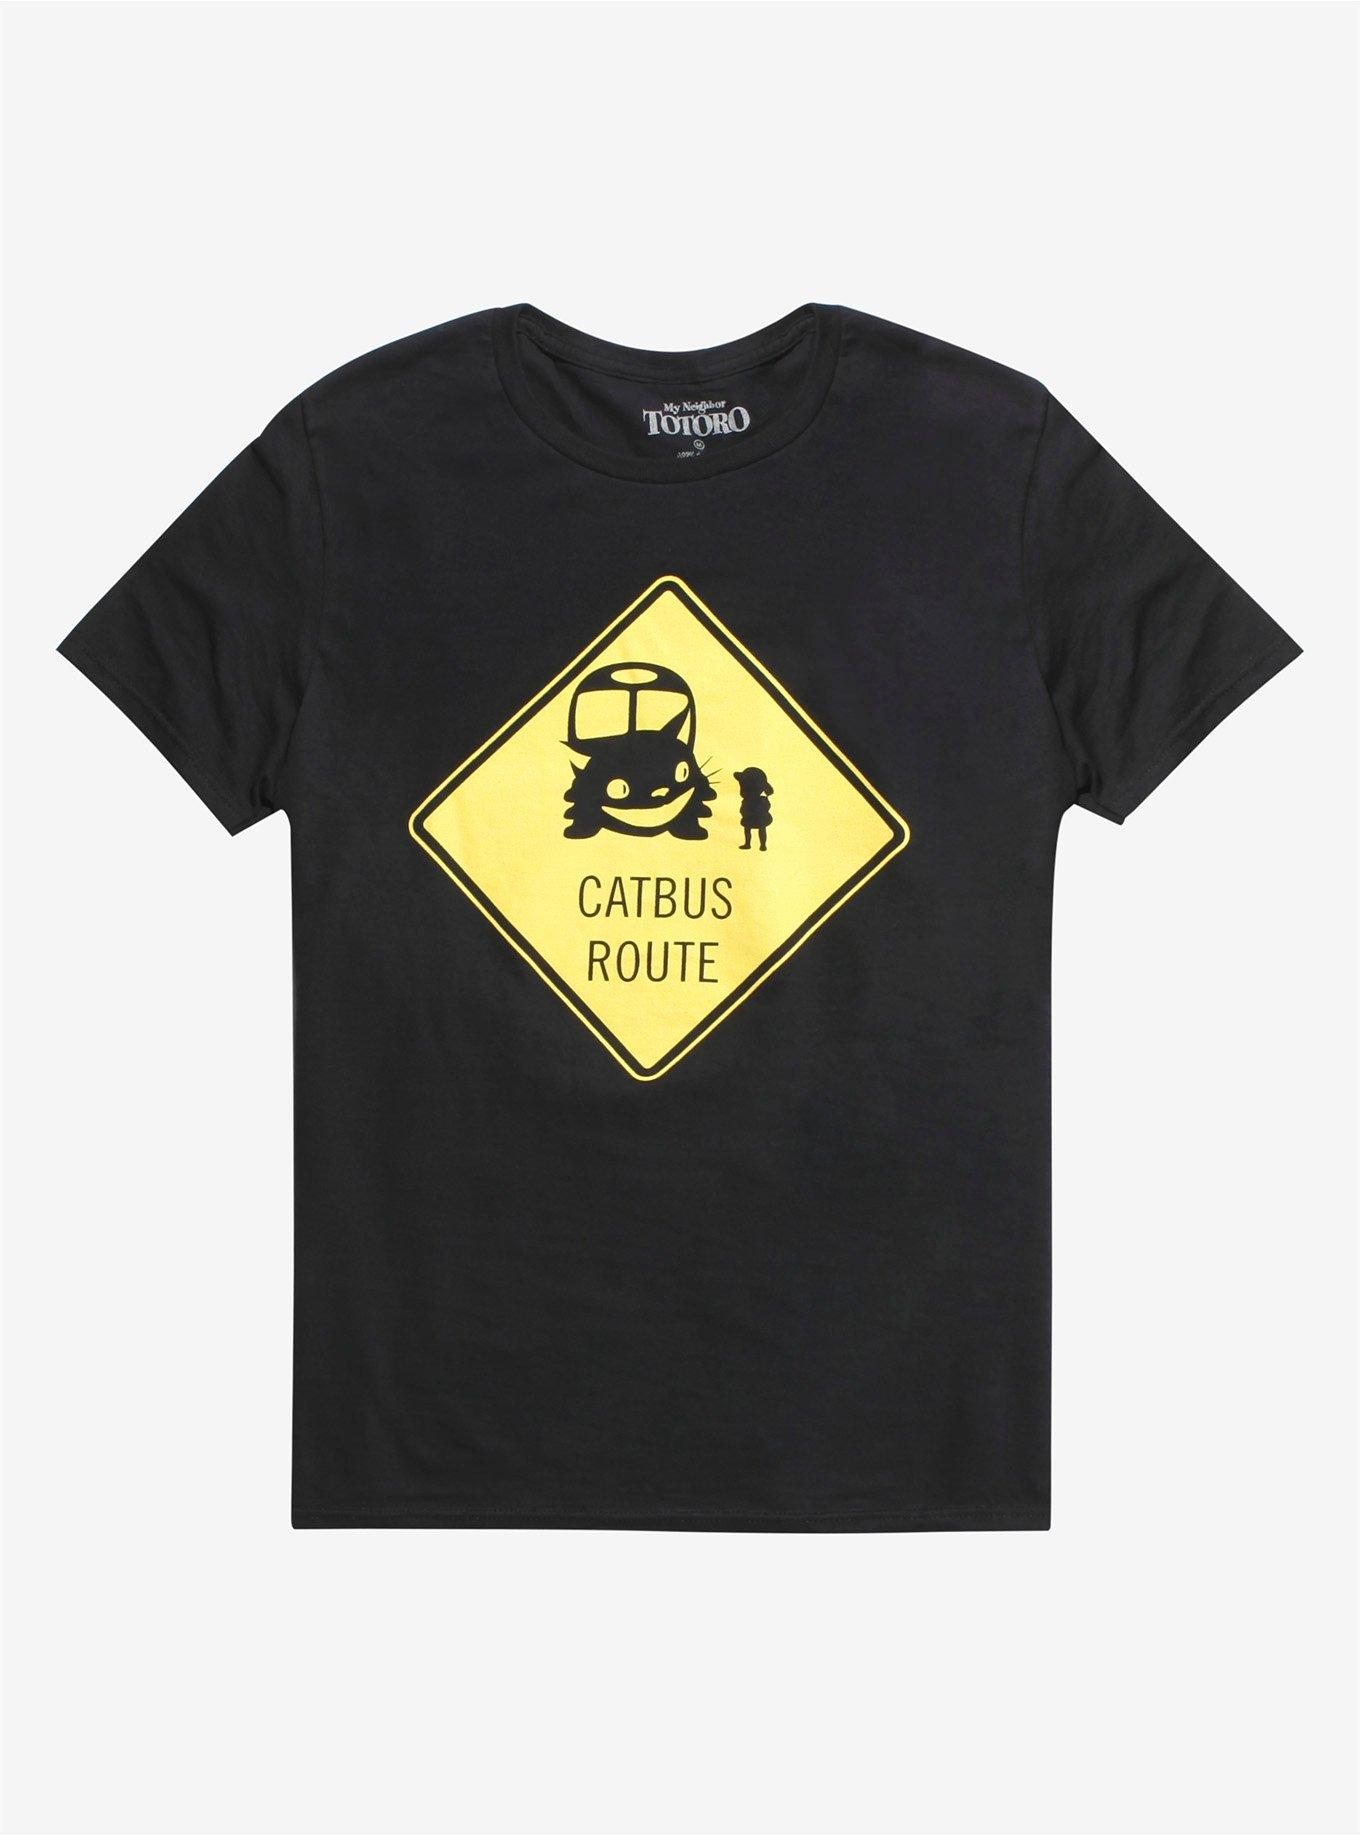 Our Universe Studio Ghibli My Neighbor Totoro Catbus Route T-Shirt Hot Topic Exclusive, BLACK, hi-res